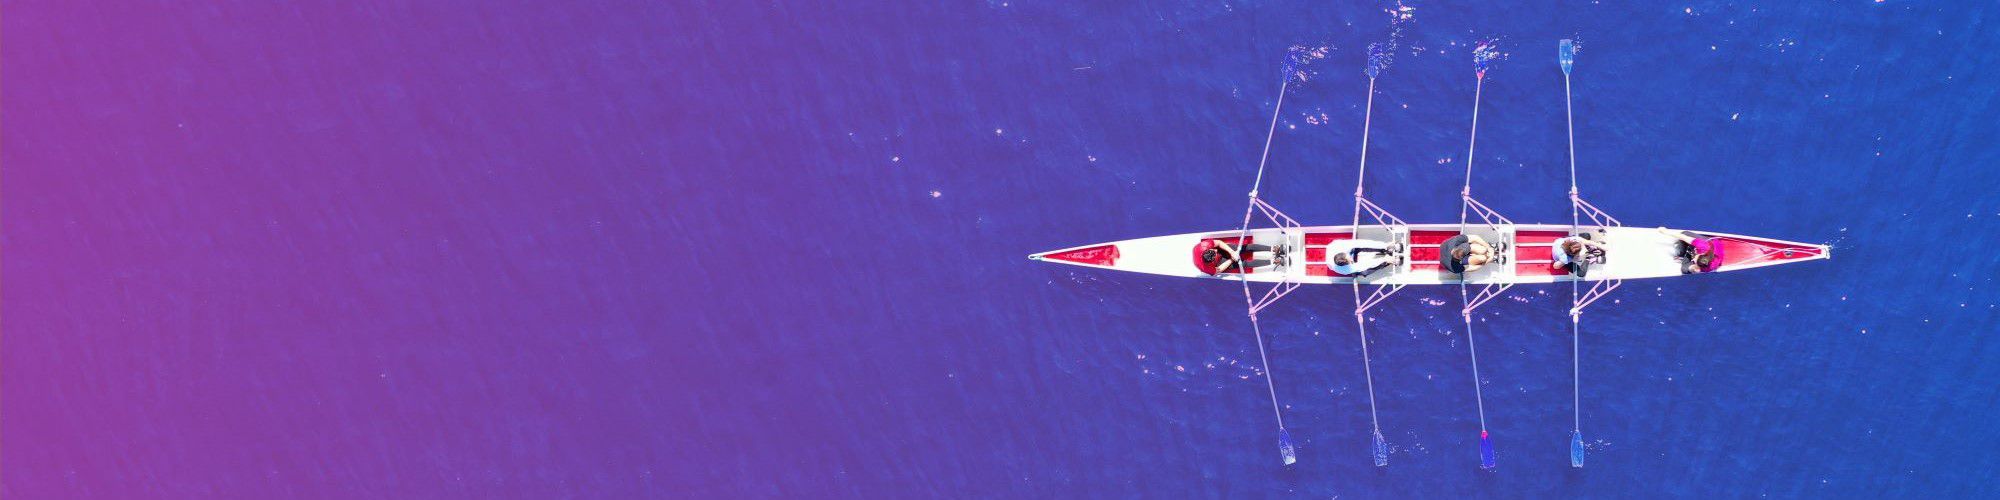 Rowing boat on the water with a purple and blue gradient